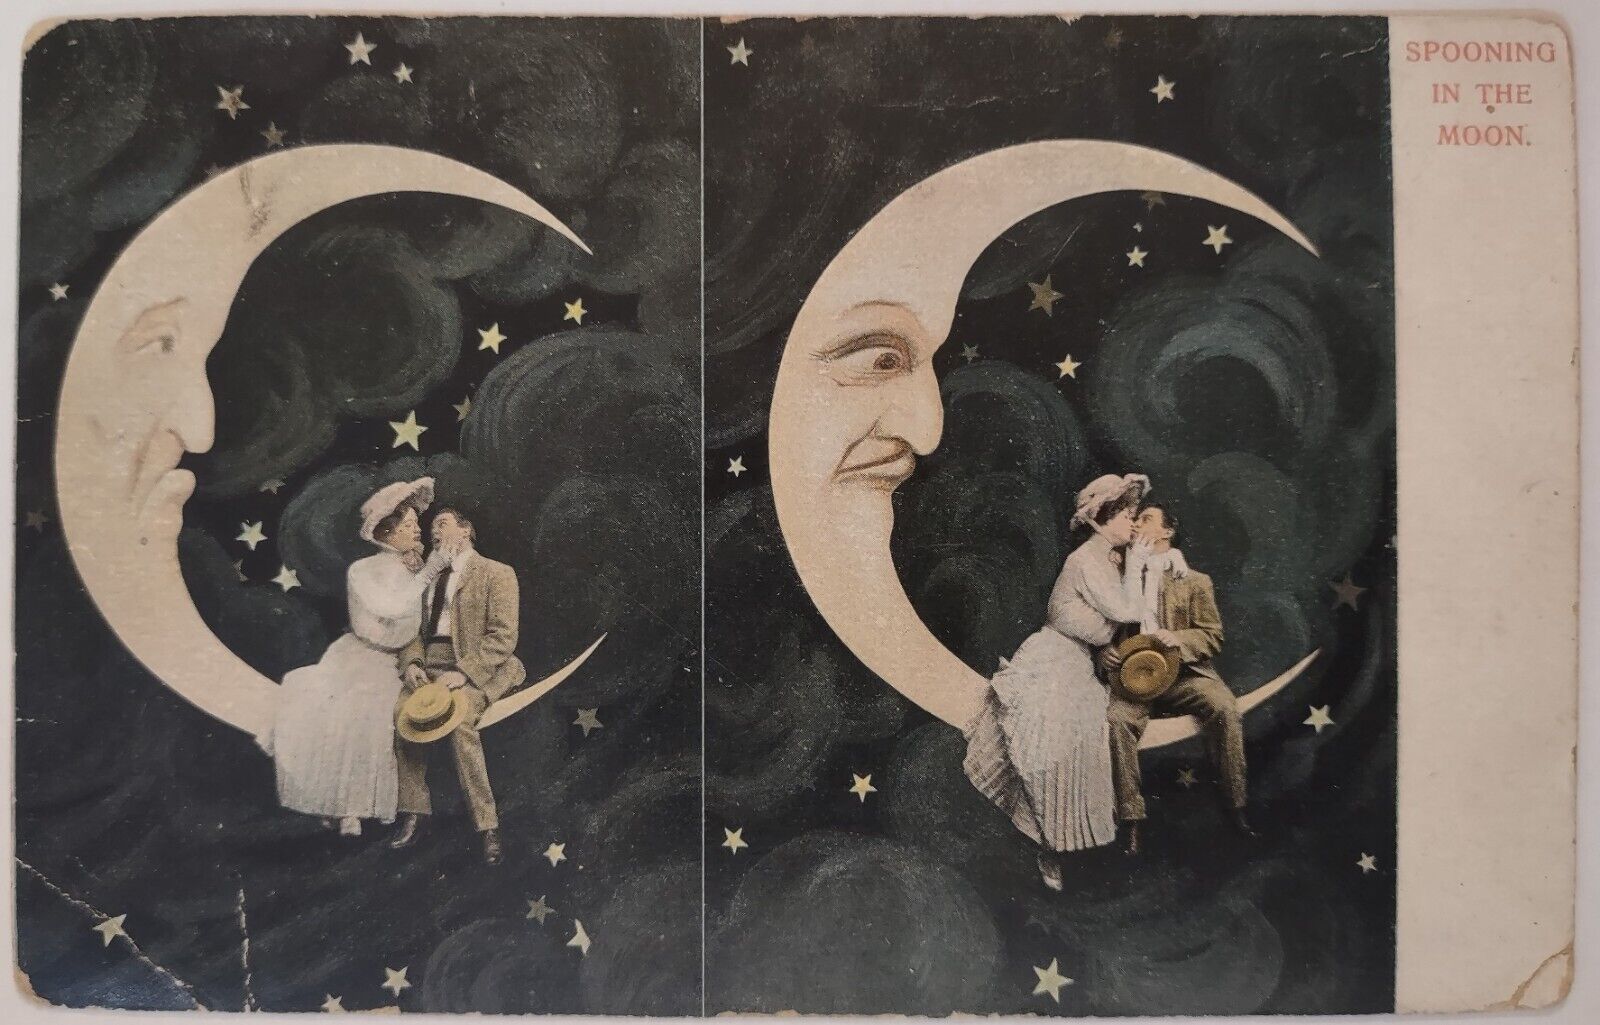 Vintage Postcard Spooning in the Moon Paper Crescent Moon b AA31